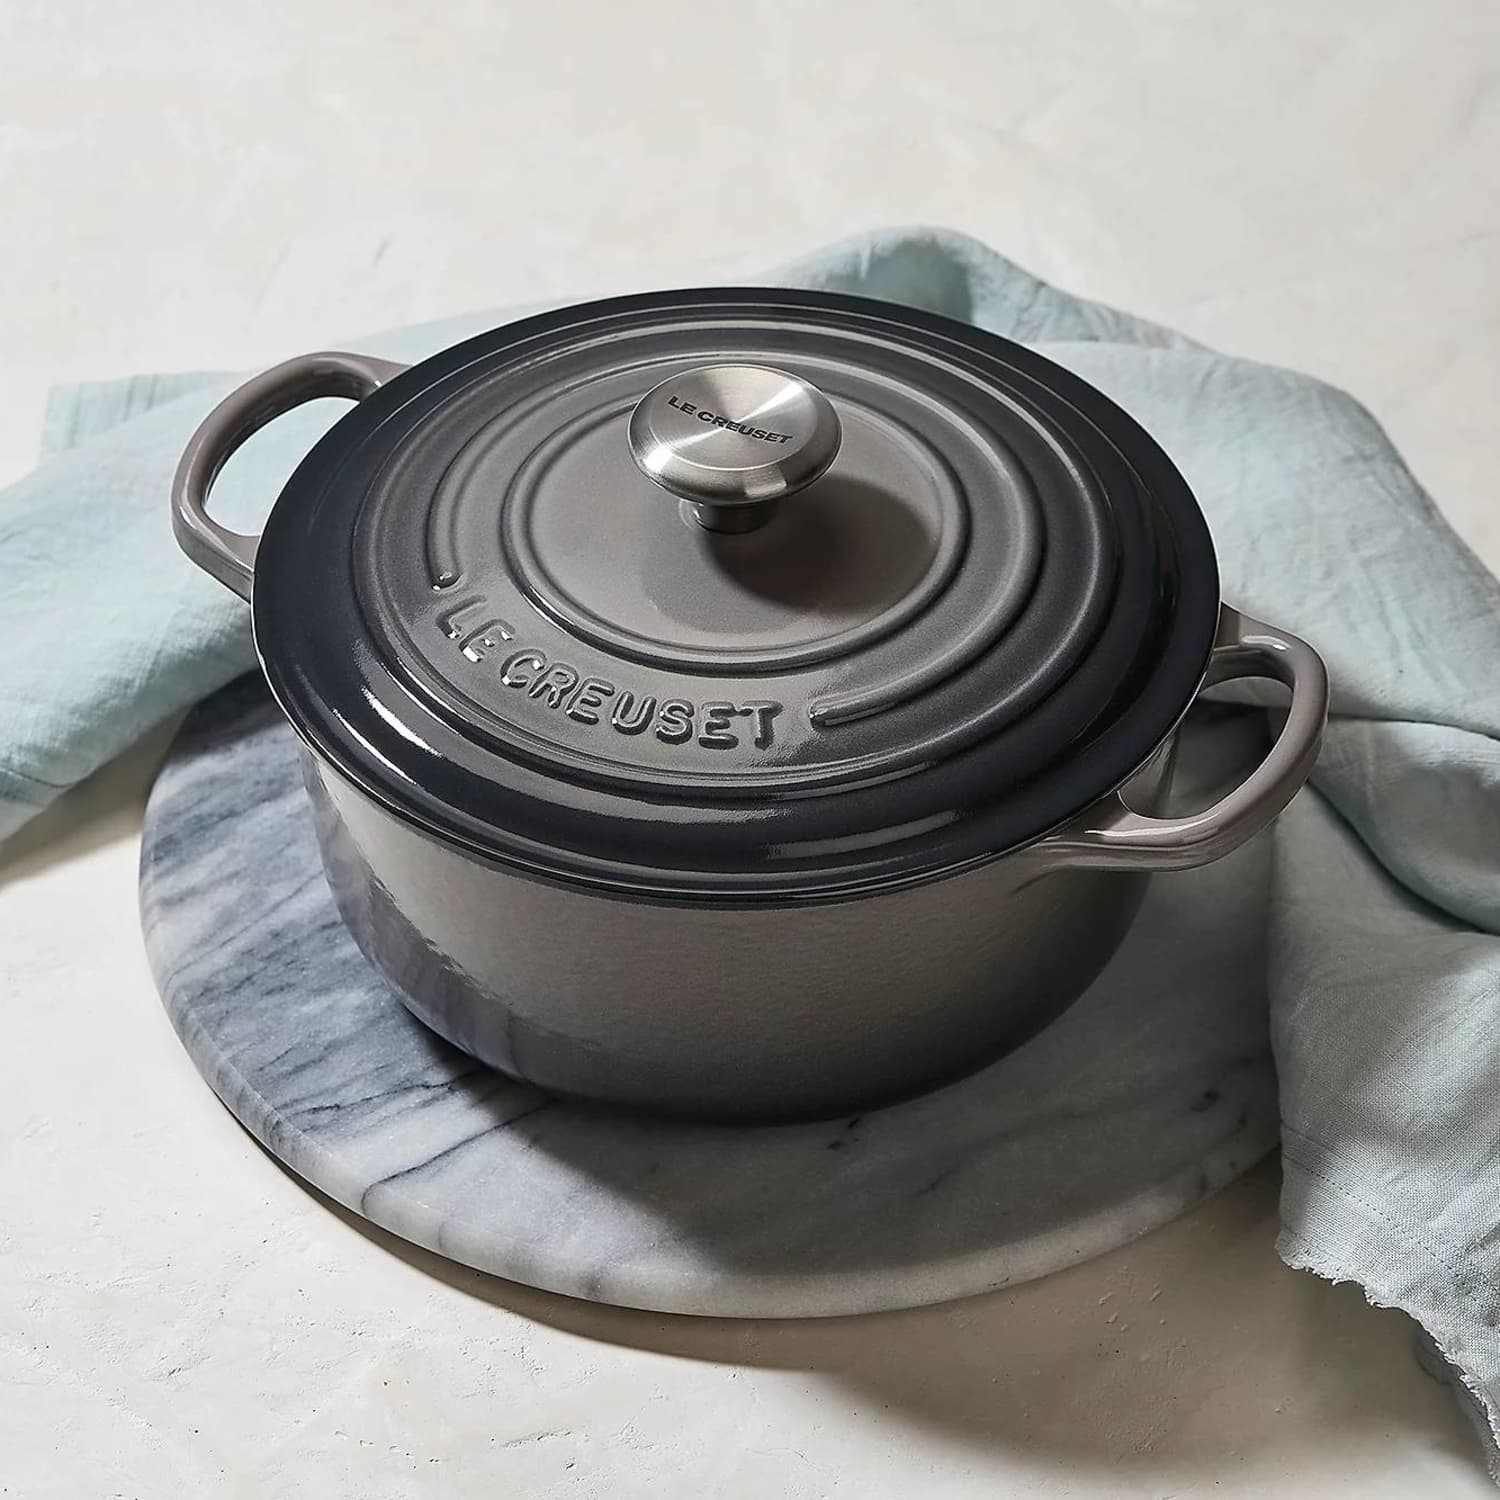 You Can Get a Dutch Oven for Just Over $40, and Shoppers Say It's